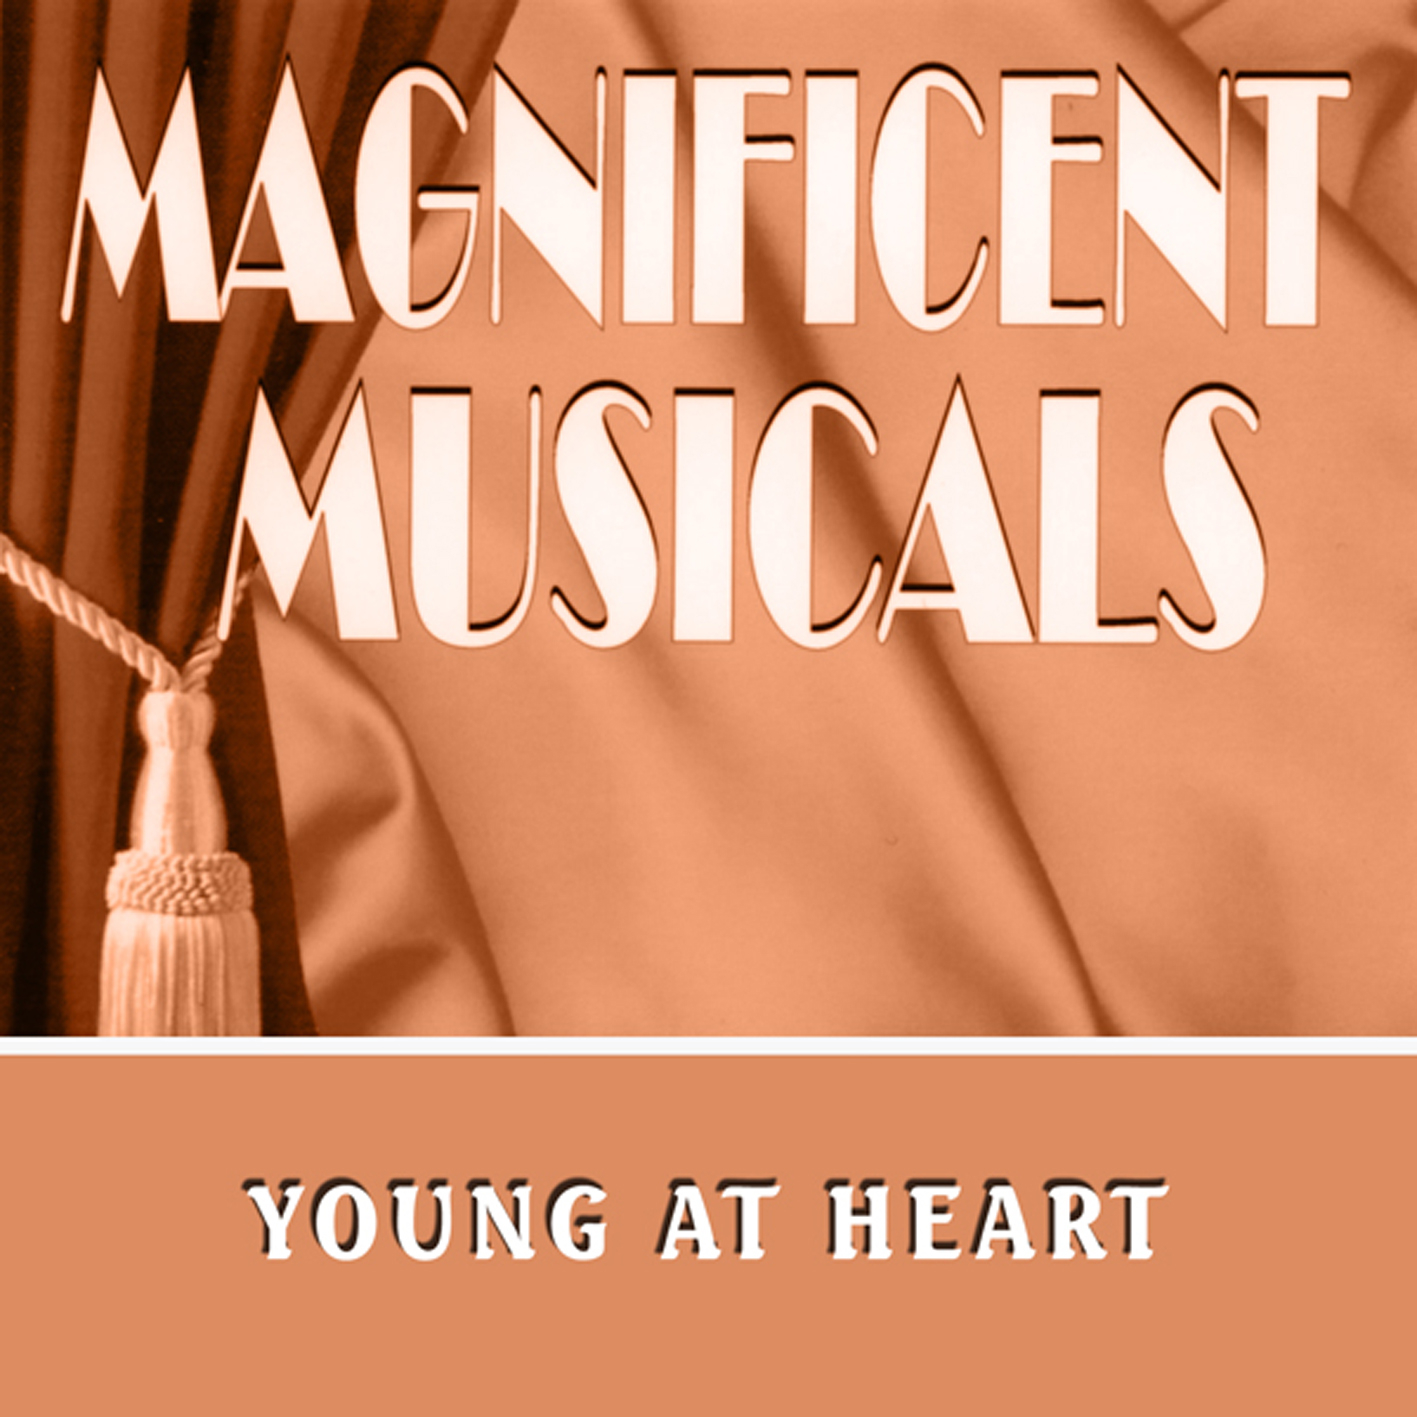 The Magnificent Musicals: Young At Heart